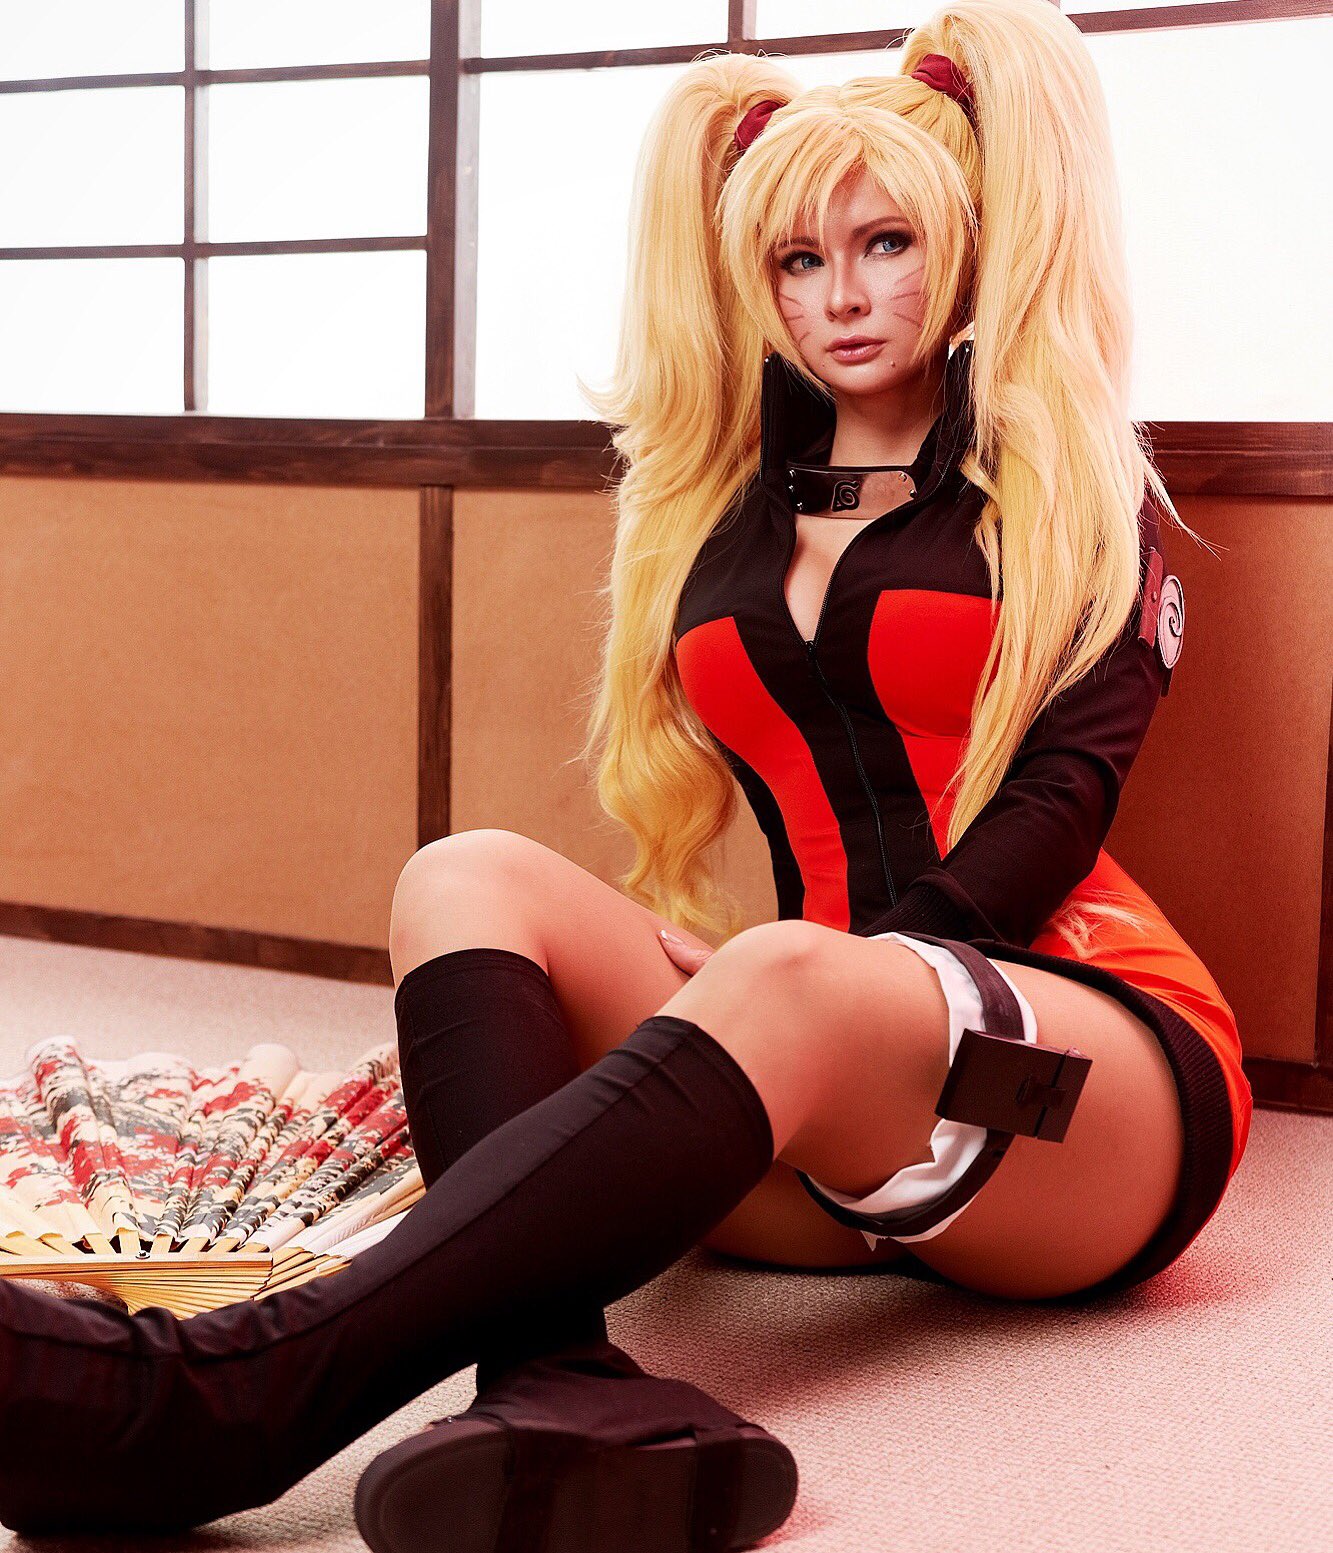 Female Naruto Cosplay - Jannet in Cosplay